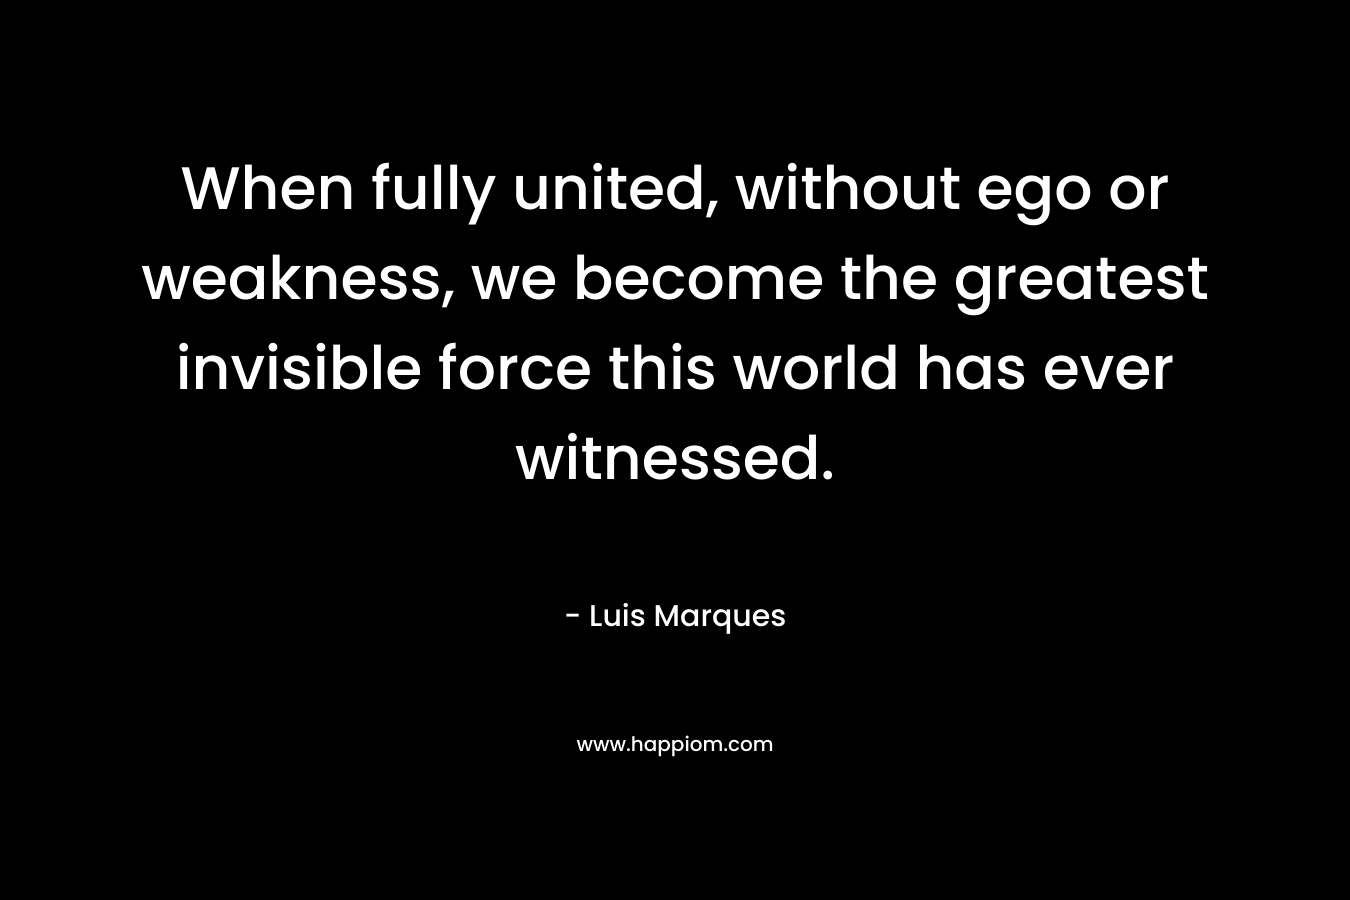 When fully united, without ego or weakness, we become the greatest invisible force this world has ever witnessed. – Luis Marques